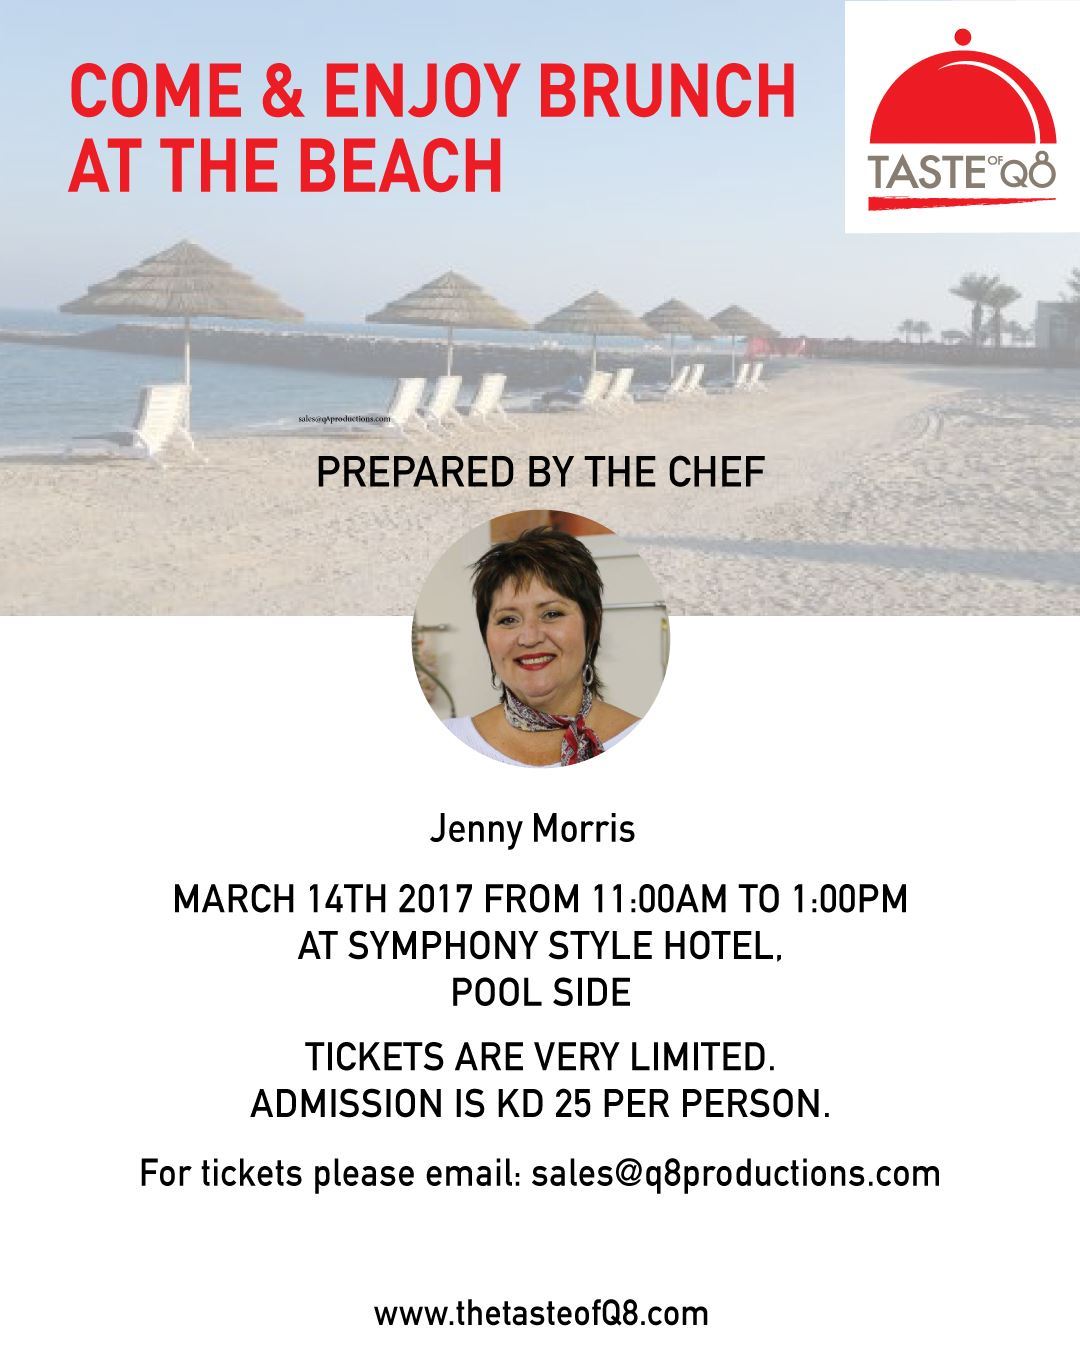 Come & Enjoy Brunch at the Beach - by Chef Jenny Morris